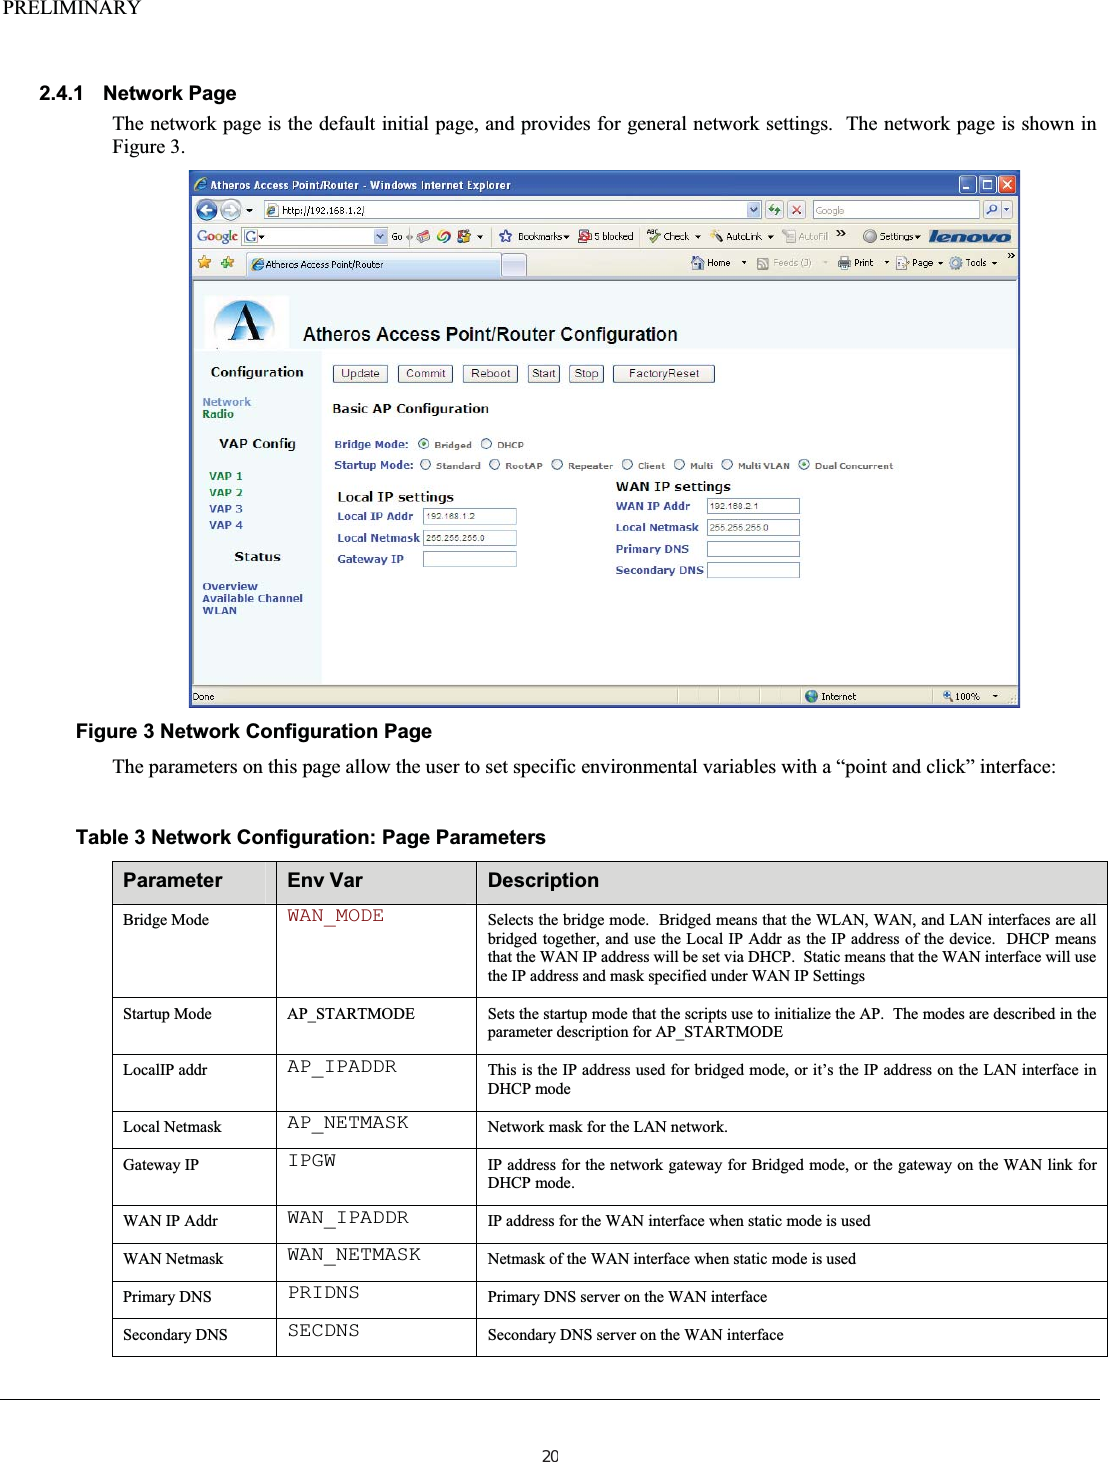 PRELIMINARY2.4.1 Network Page The network page is the default initial page, and provides for general network settings.  The network page is shown in Figure 3. Figure 3 Network Configuration Page The parameters on this page allow the user to set specific environmental variables with a “point and click” interface:   Table 3 Network Configuration: Page Parameters  Parameter Env Var  Description Bridge Mode  WAN_MODE Selects the bridge mode.  Bridged means that the WLAN, WAN, and LAN interfaces are all bridged together, and use the Local IP Addr as the IP address of the device.  DHCP means that the WAN IP address will be set via DHCP.  Static means that the WAN interface will use the IP address and mask specified under WAN IP Settings Startup Mode  AP_STARTMODE  Sets the startup mode that the scripts use to initialize the AP.  The modes are described in the parameter description for AP_STARTMODE LocalIP addr  AP_IPADDR This is the IP address used for bridged mode, or it’s the IP address on the LAN interface in DHCP mode Local Netmask  AP_NETMASK Network mask for the LAN network. Gateway IP  IPGW IP address for the network gateway for Bridged mode, or the gateway on the WAN link for DHCP mode. WAN IP Addr  WAN_IPADDR IP address for the WAN interface when static mode is used WAN Netmask  WAN_NETMASK Netmask of the WAN interface when static mode is used Primary DNS  PRIDNS Primary DNS server on the WAN interface Secondary DNS  SECDNS Secondary DNS server on the WAN interface 20